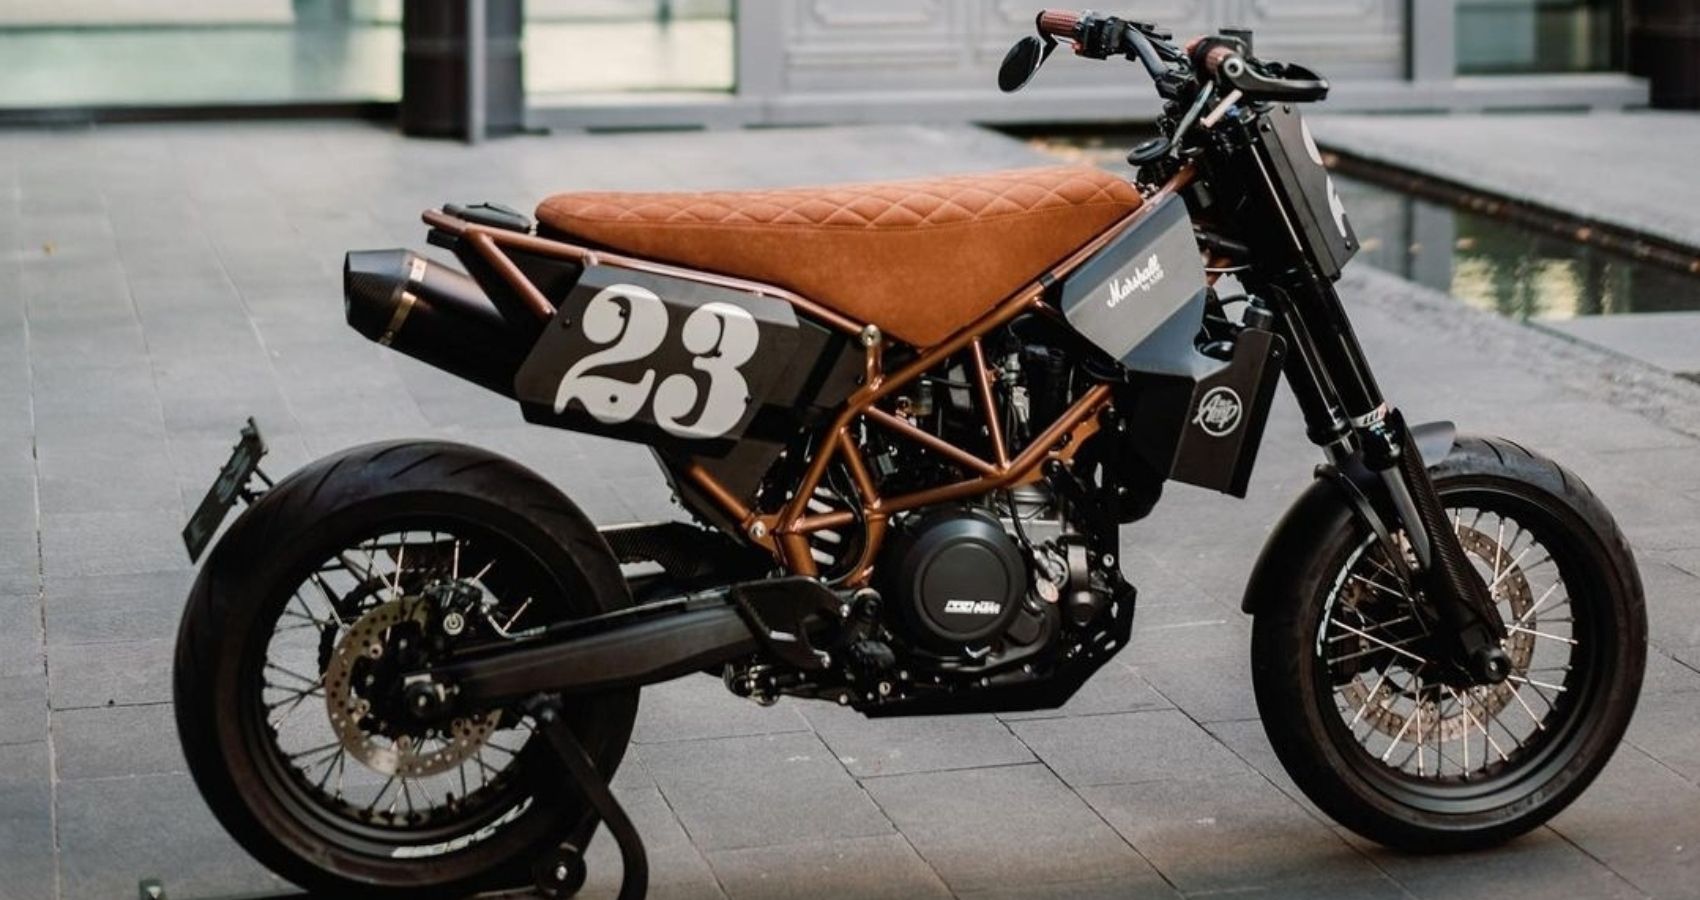 Side view of the customized KTM 690 SMC-R by AMP Motorcycles